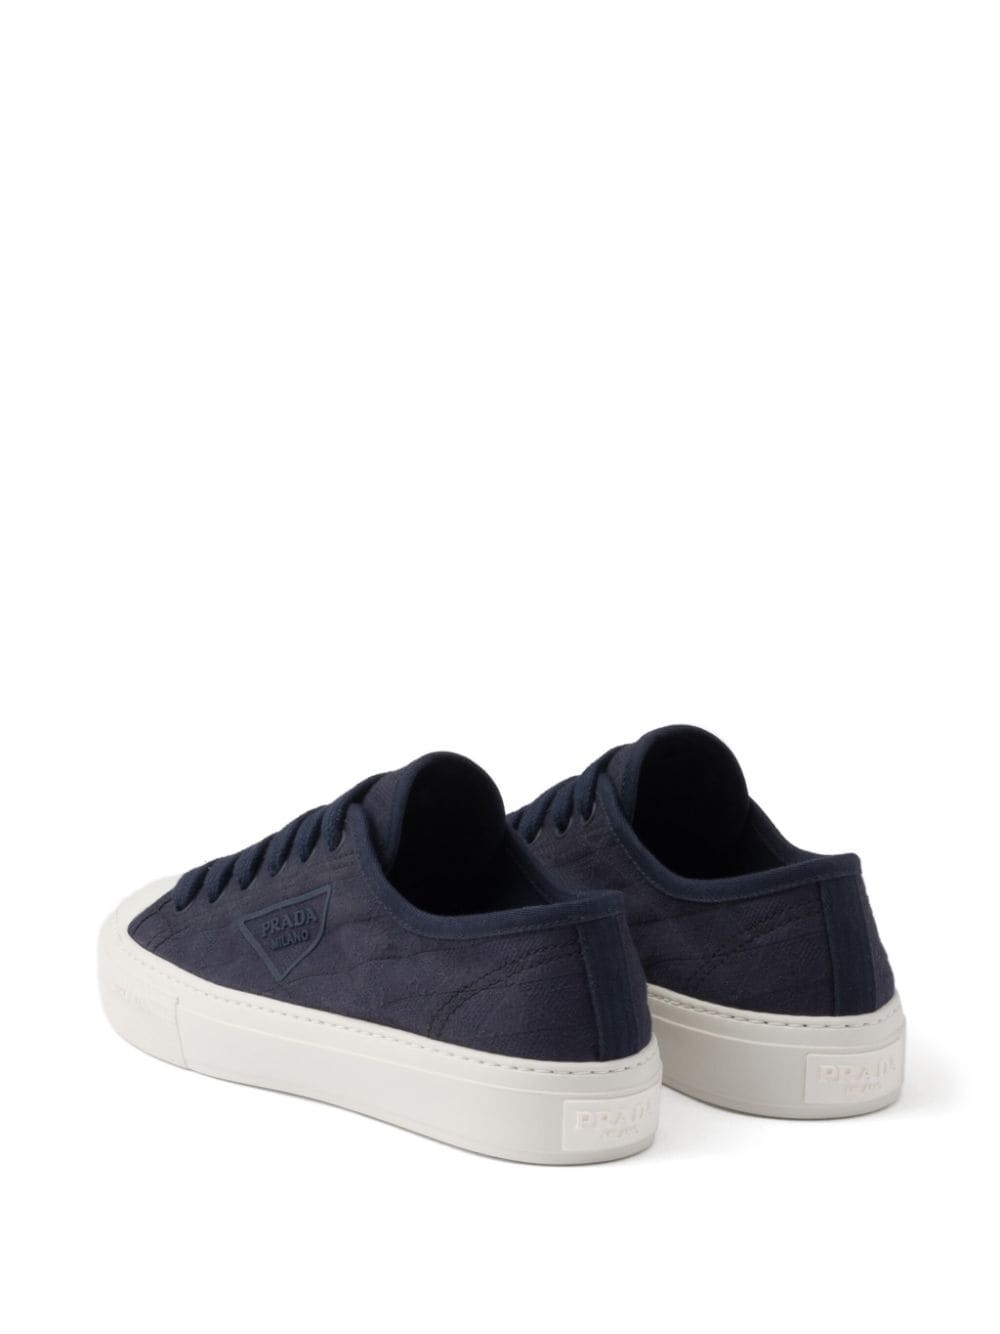 triangle-logo canvas sneakers - 3